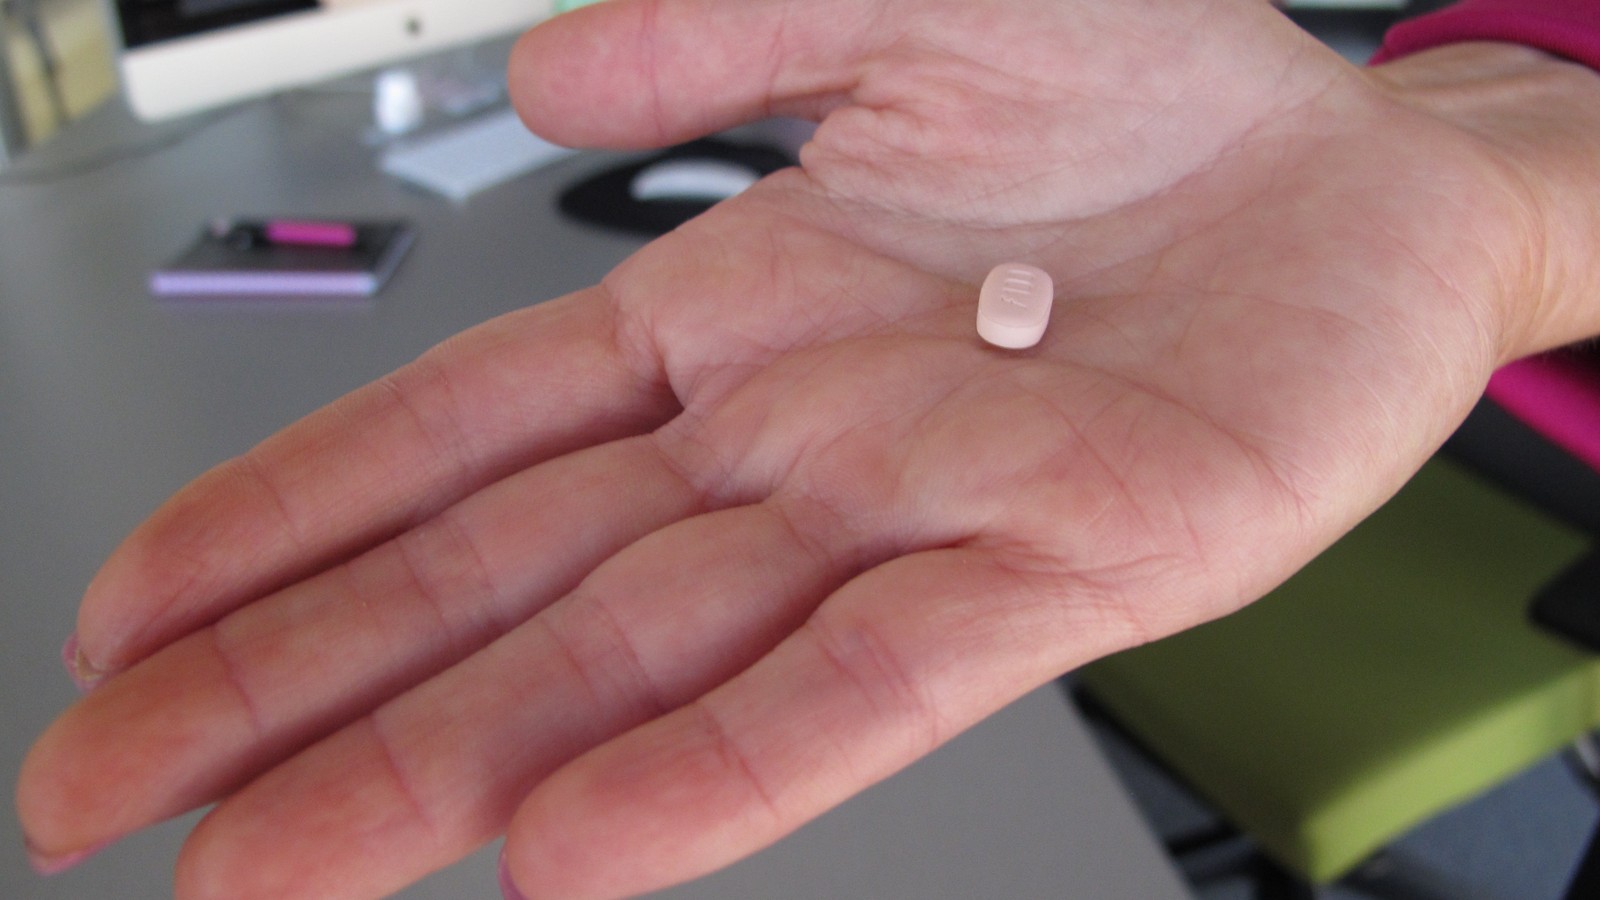 Why Flibanserin Is Not the 'Female Viagra' - The Atlantic